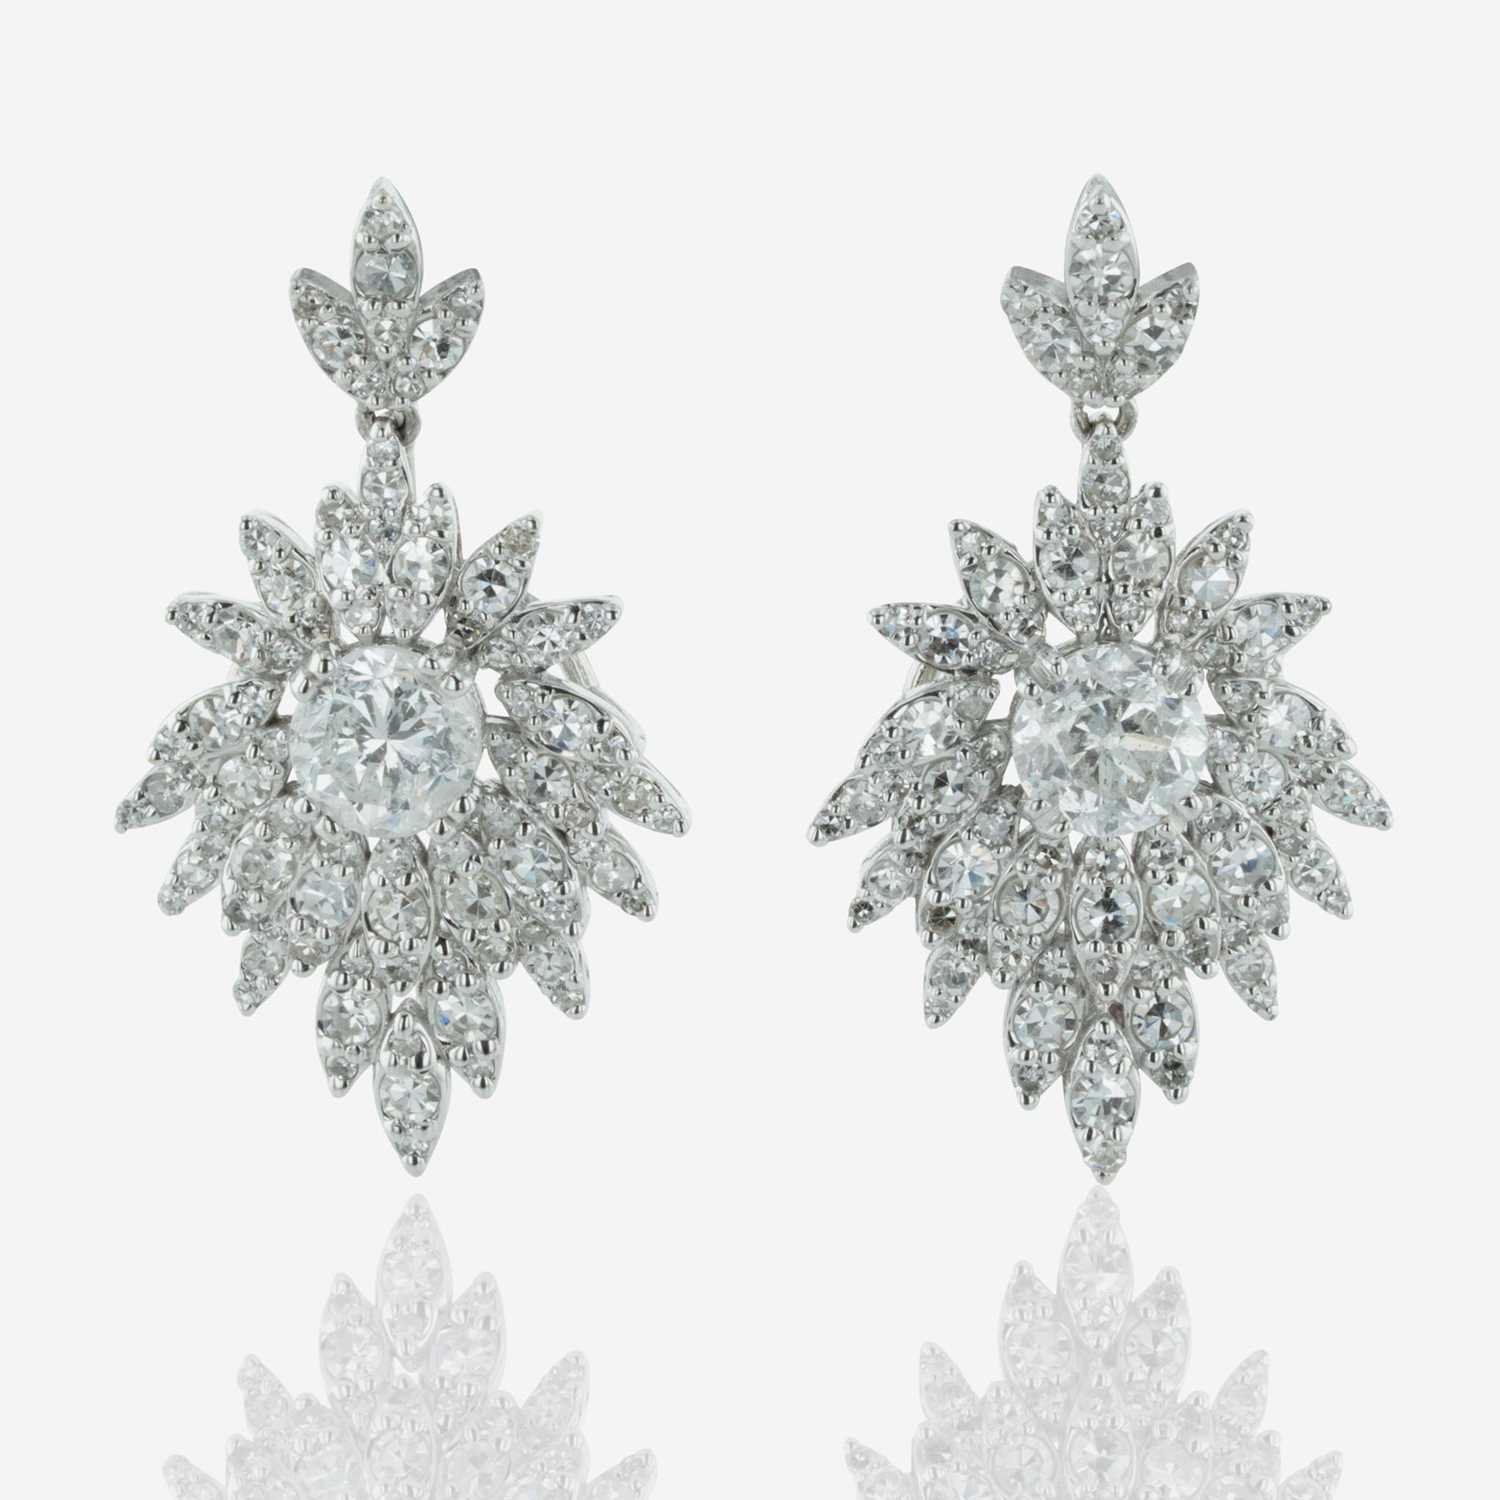 Lot 212 - A Pair of 18K White Gold and Diamond Earrings